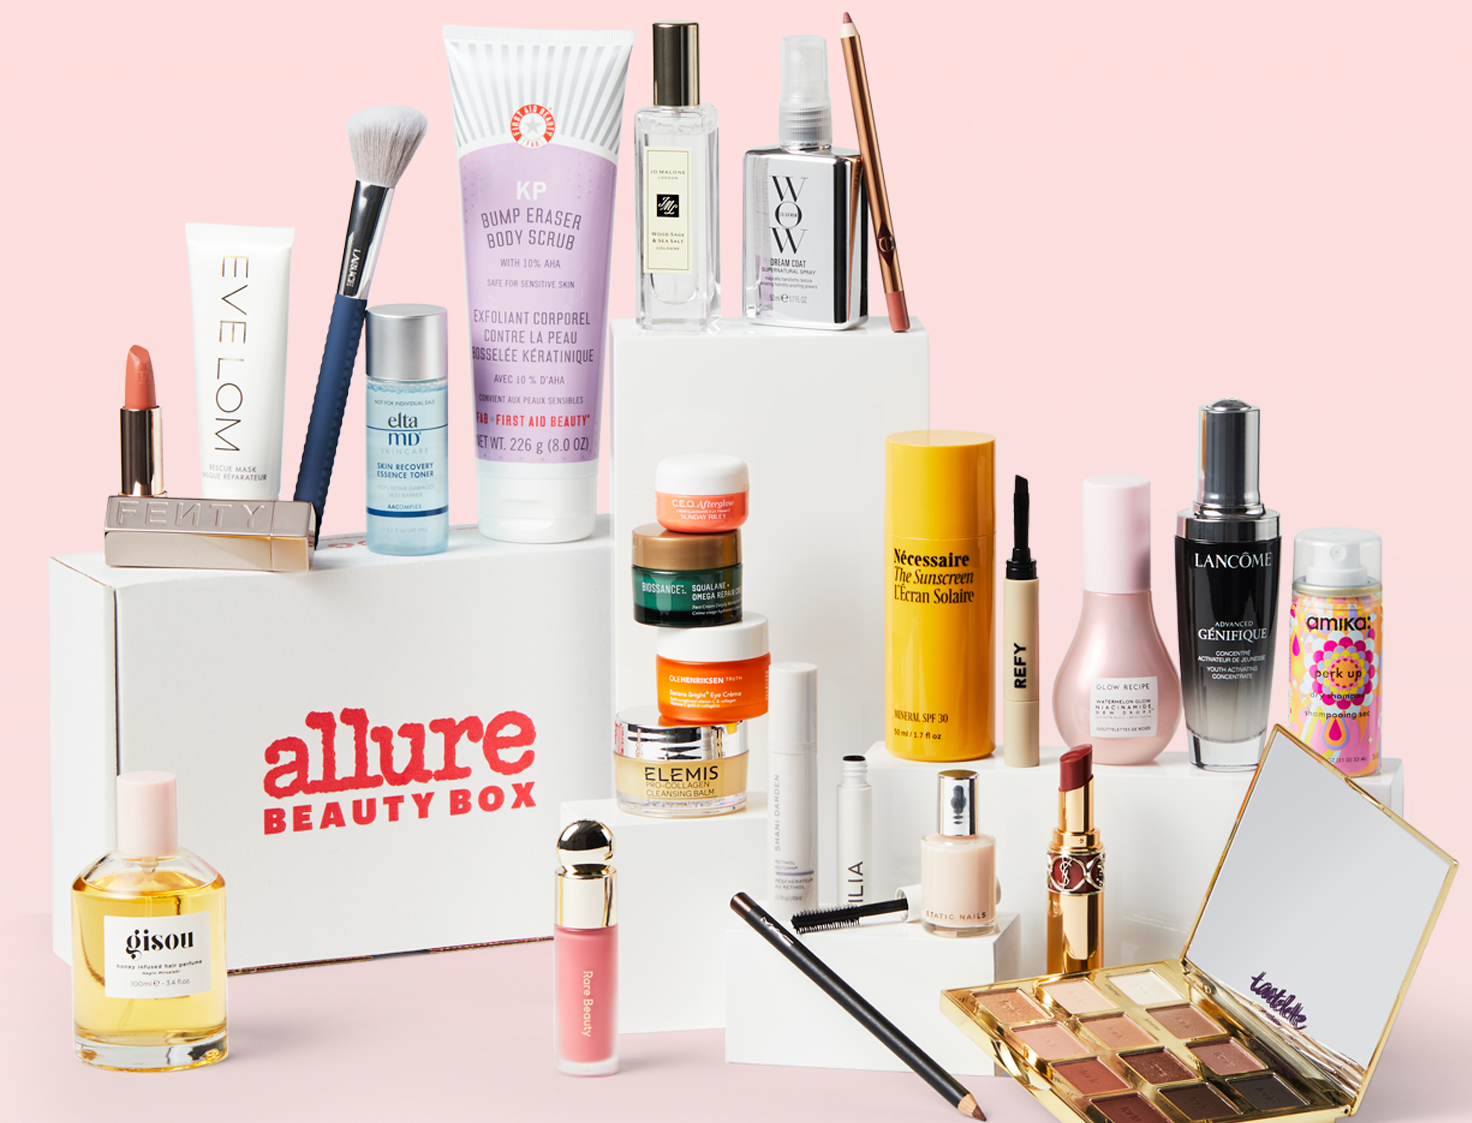 Next Skin Store - Amazing products with exclusive discounts on